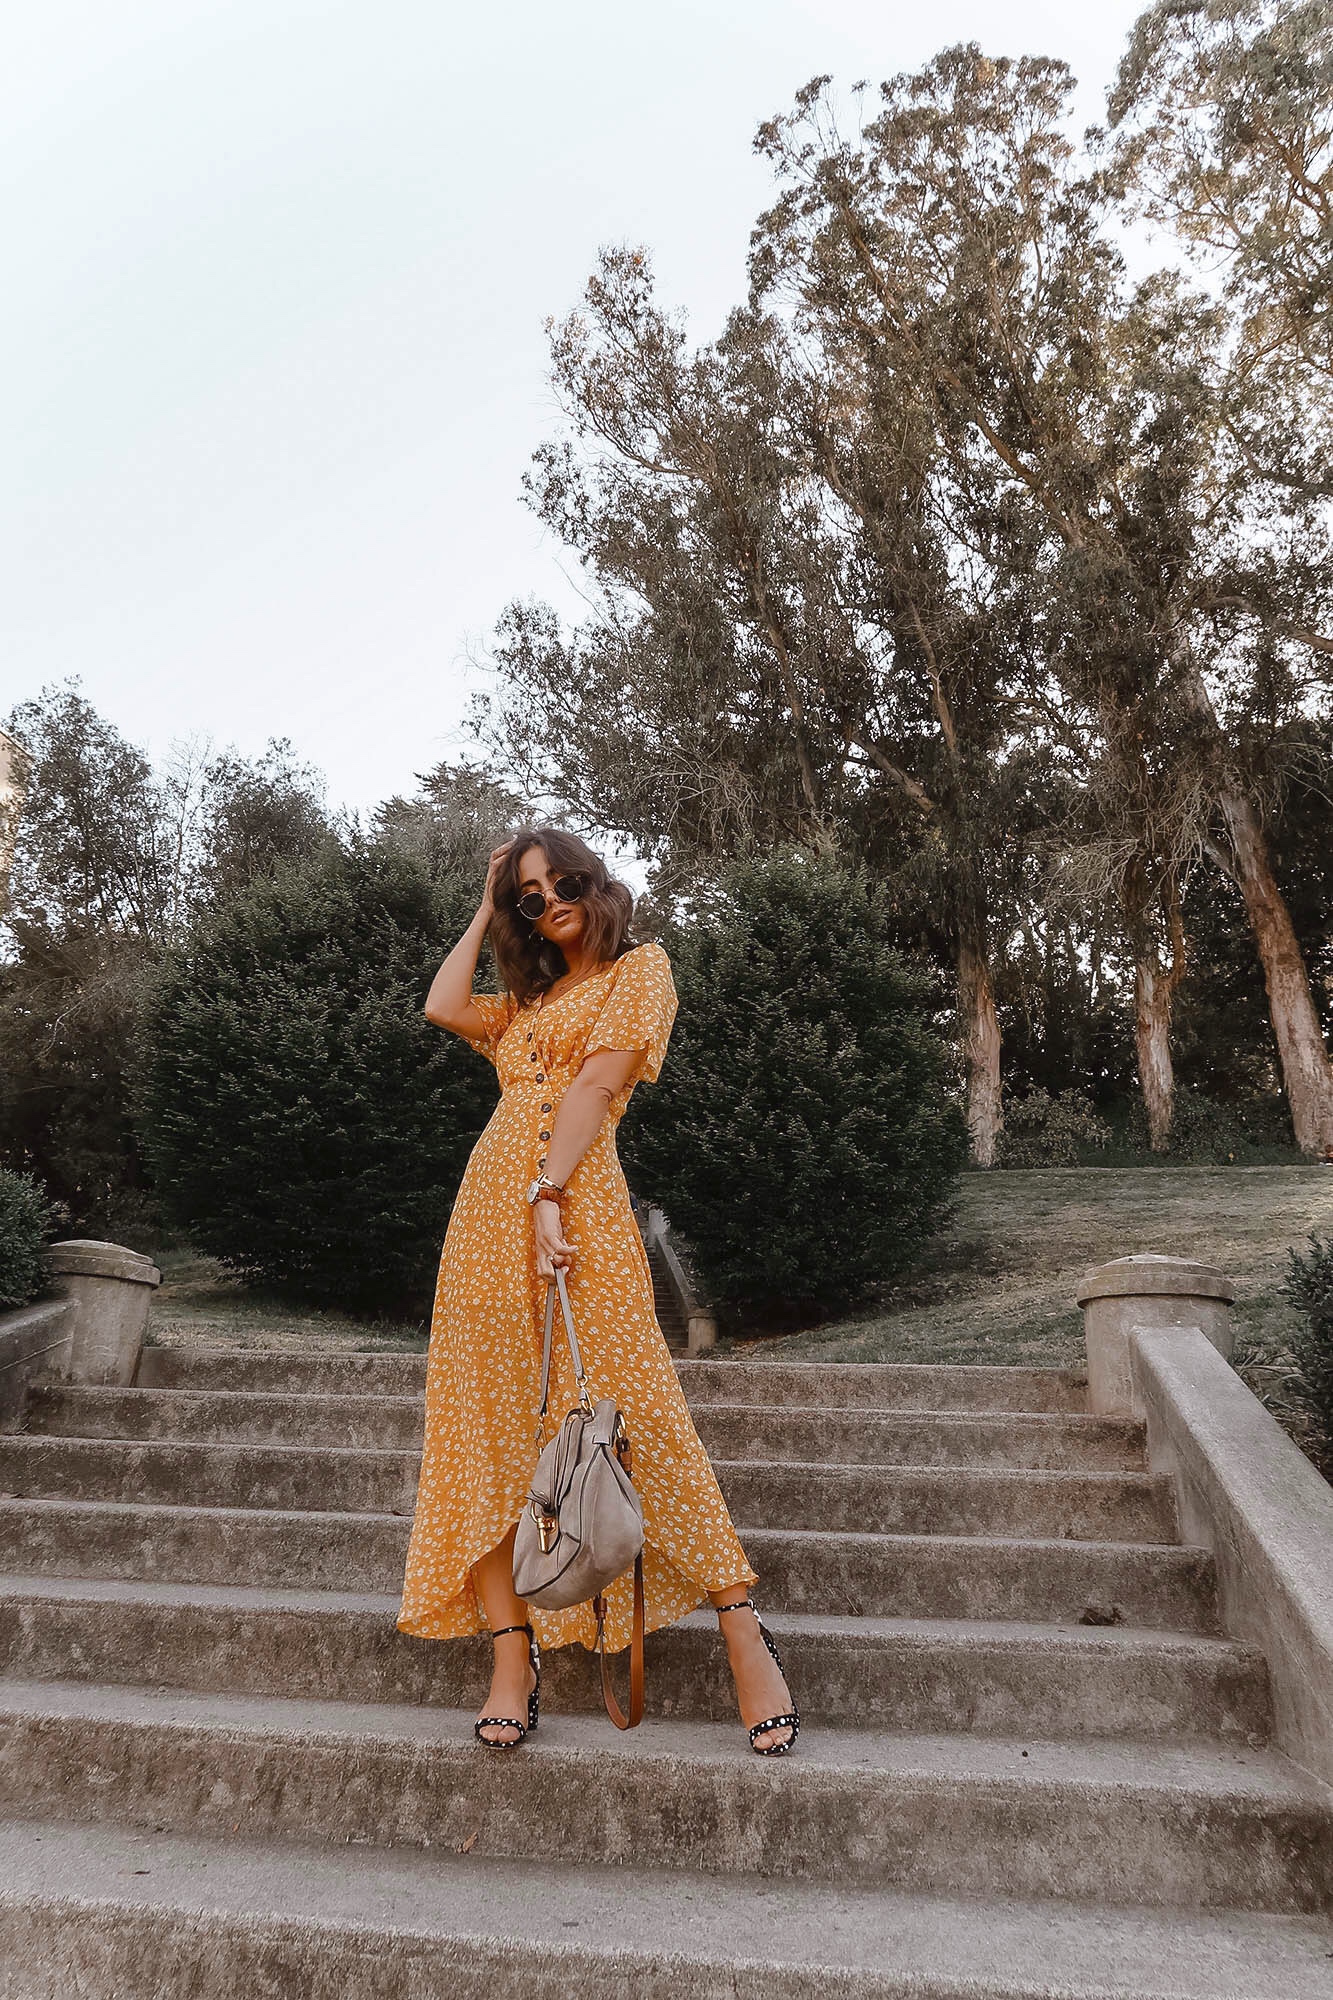 The Perfect Summer Dress – Let Me Wear That